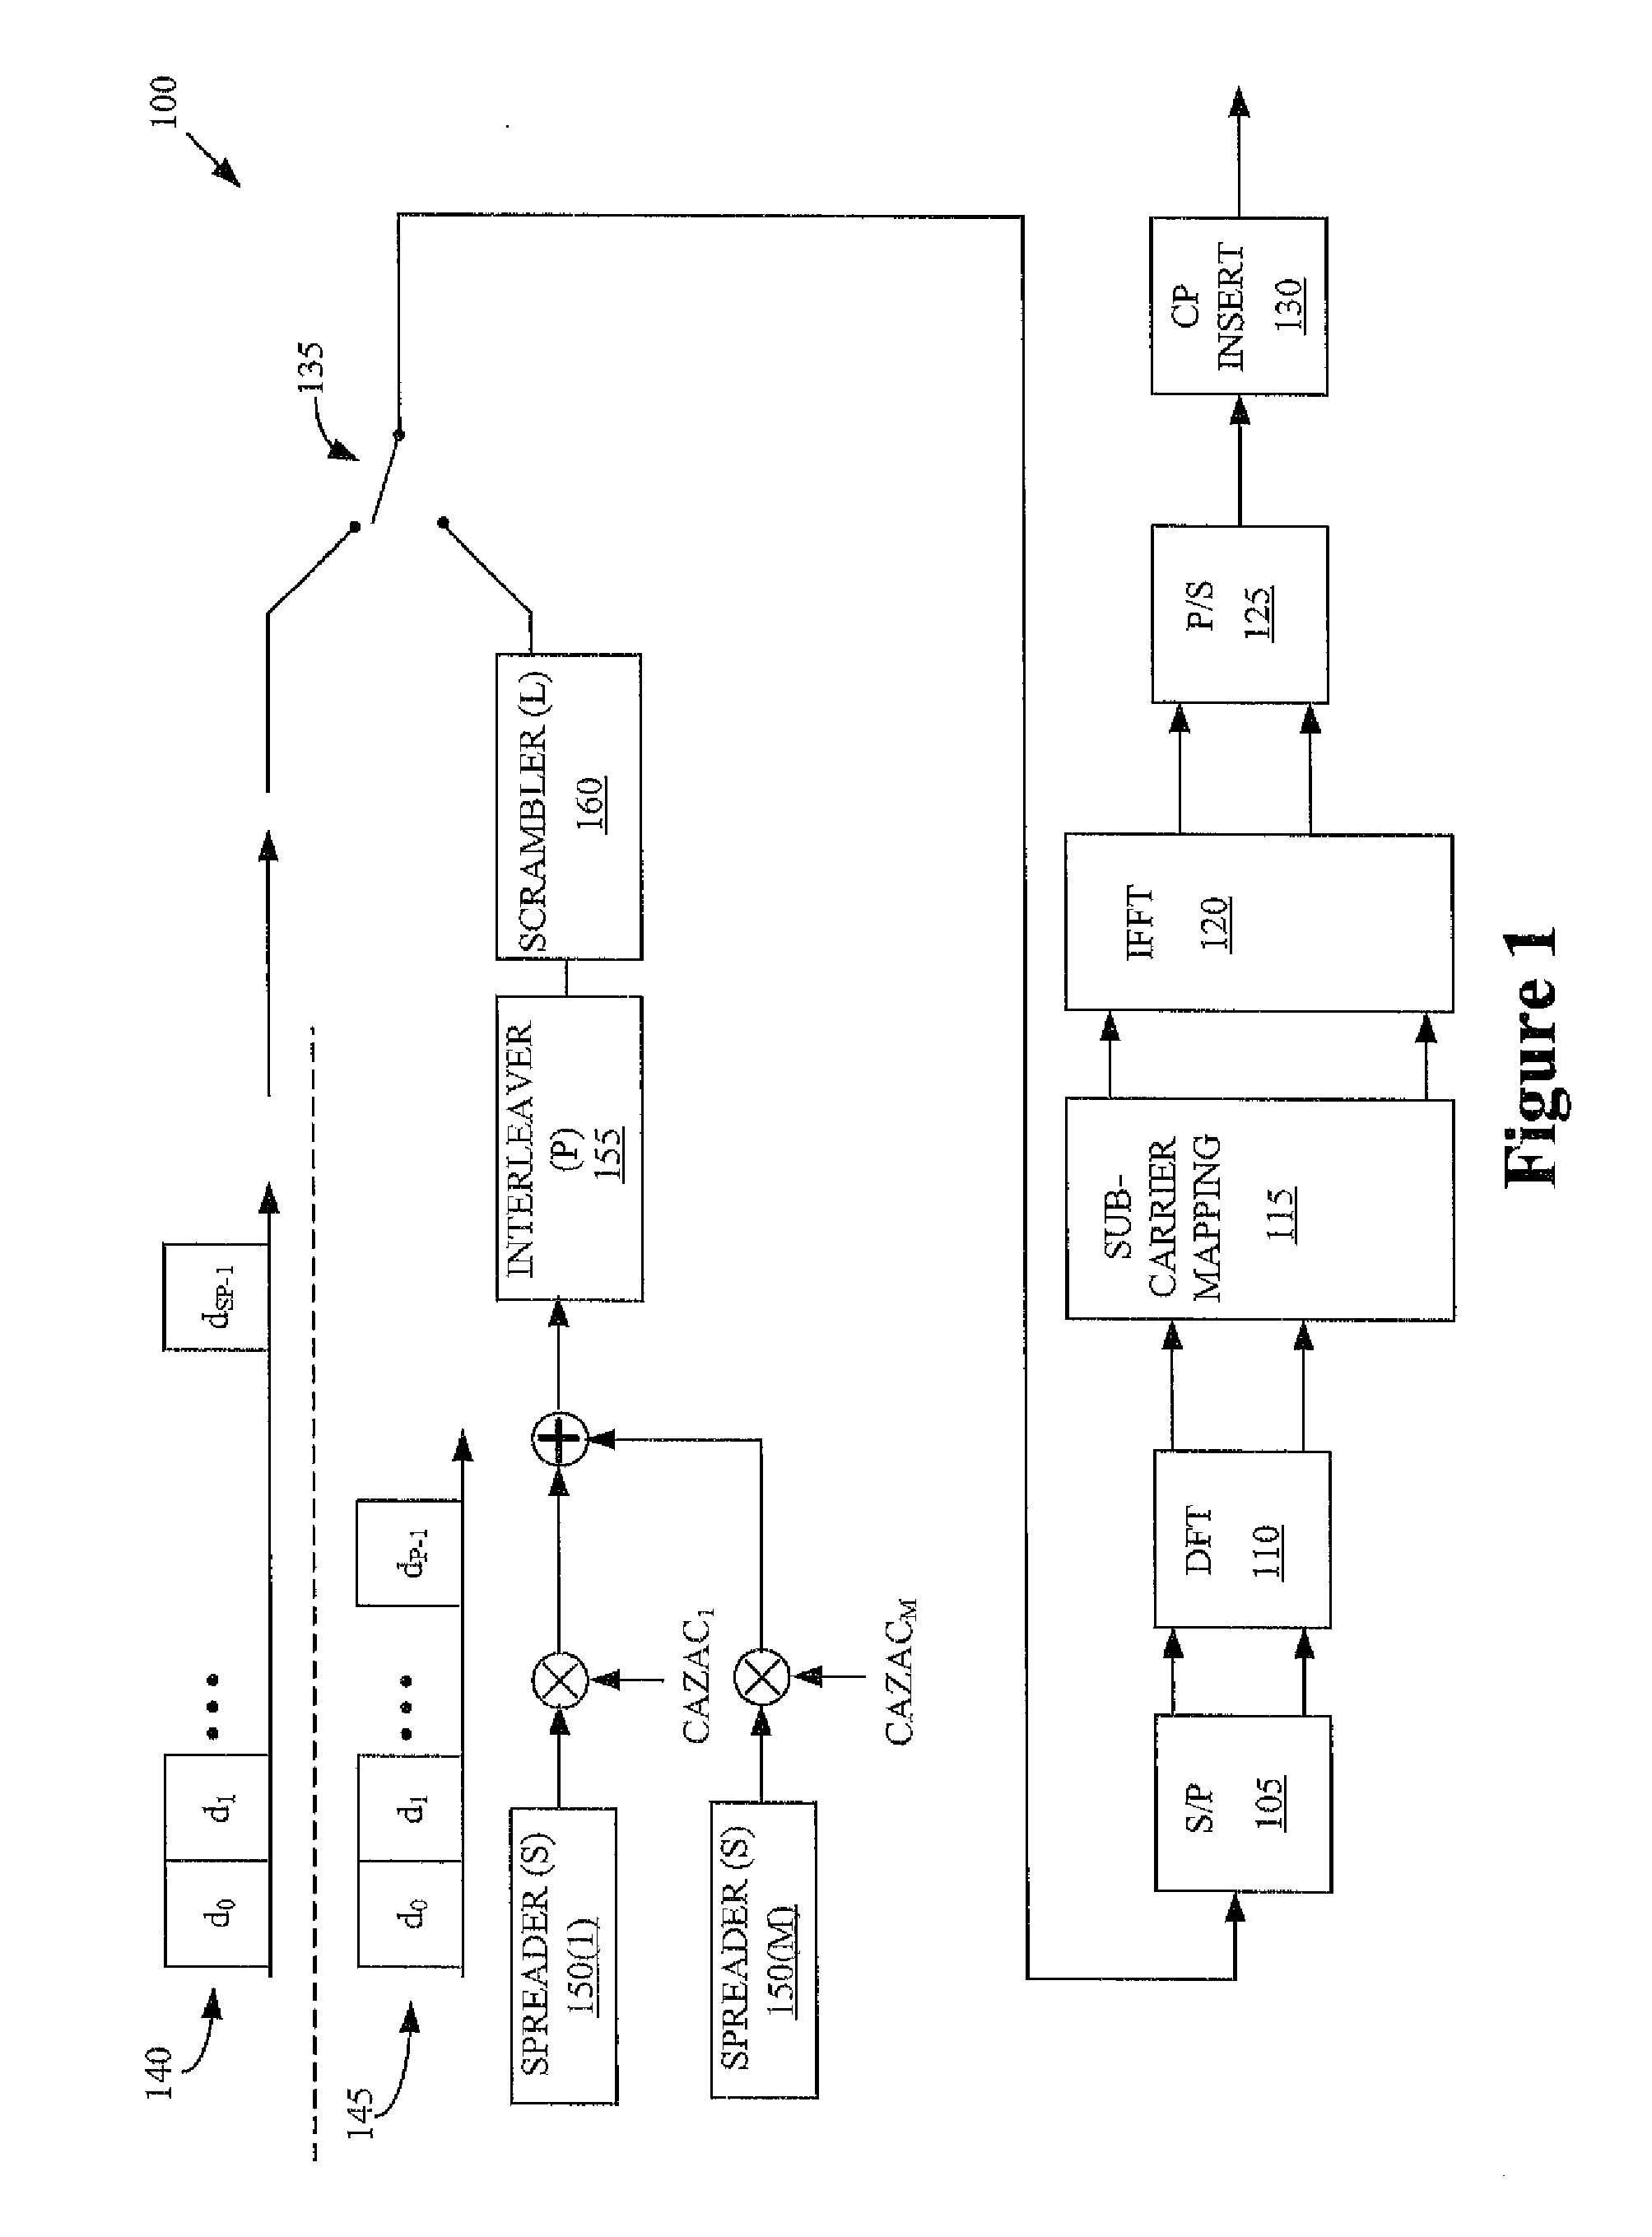 Method and apparatus for multiplexing code division multiple access and single carrier frequency division multiple access transmissions